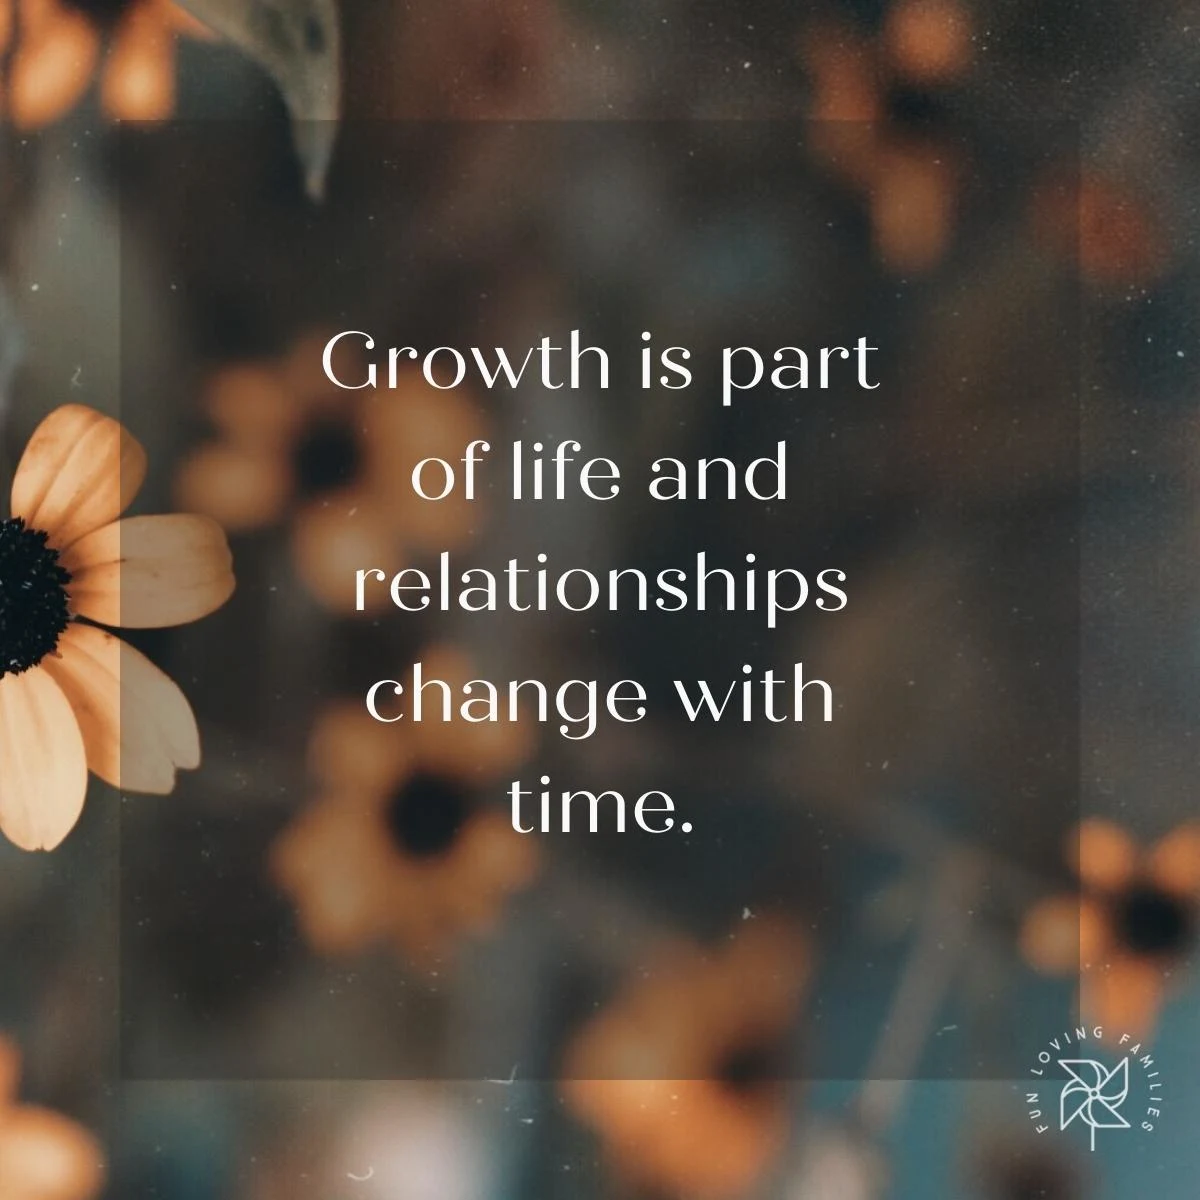 Growth is part of life and relationships change with time affirmation image